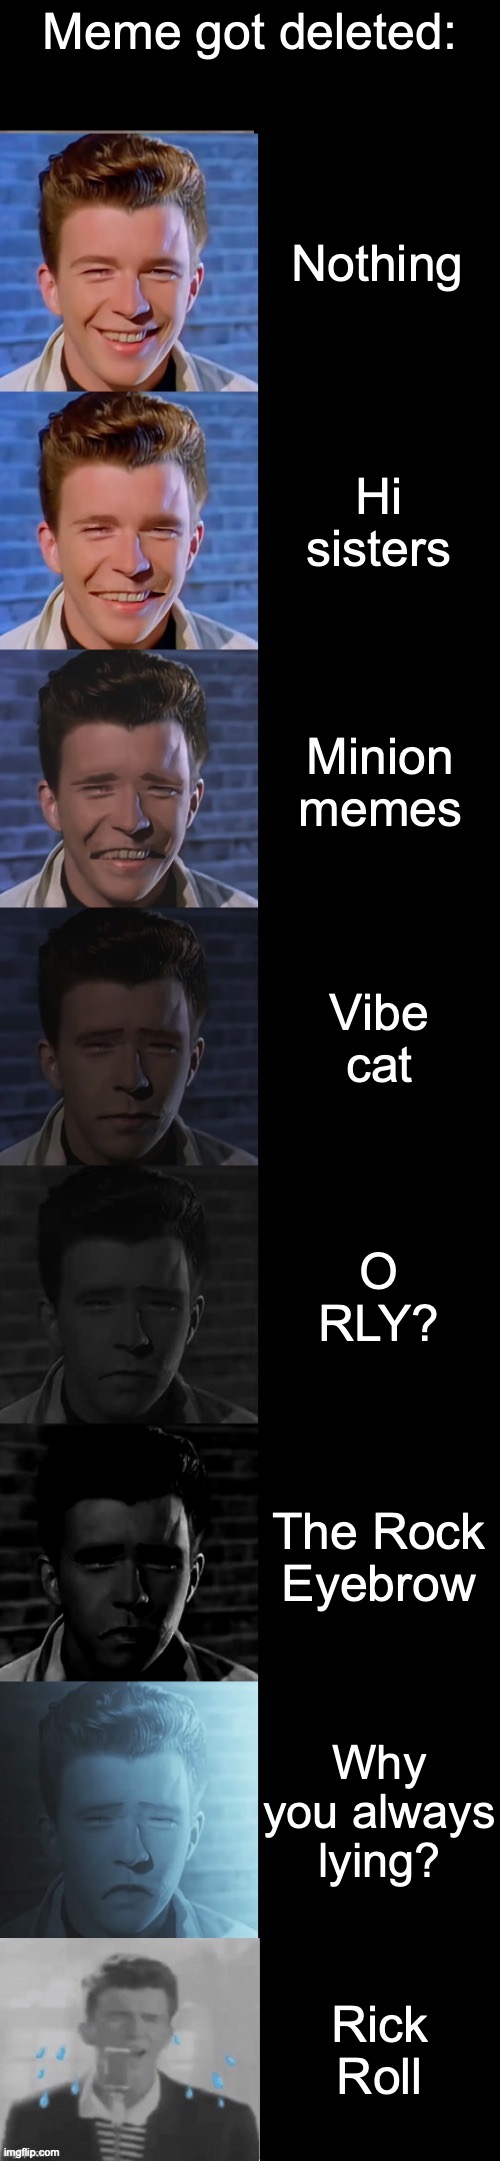 Meme got deleted | Meme got deleted:; Nothing; Hi sisters; Minion memes; Vibe cat; O RLY? The Rock Eyebrow; Why you always lying? Rick Roll | image tagged in rick astley becoming sad true form | made w/ Imgflip meme maker